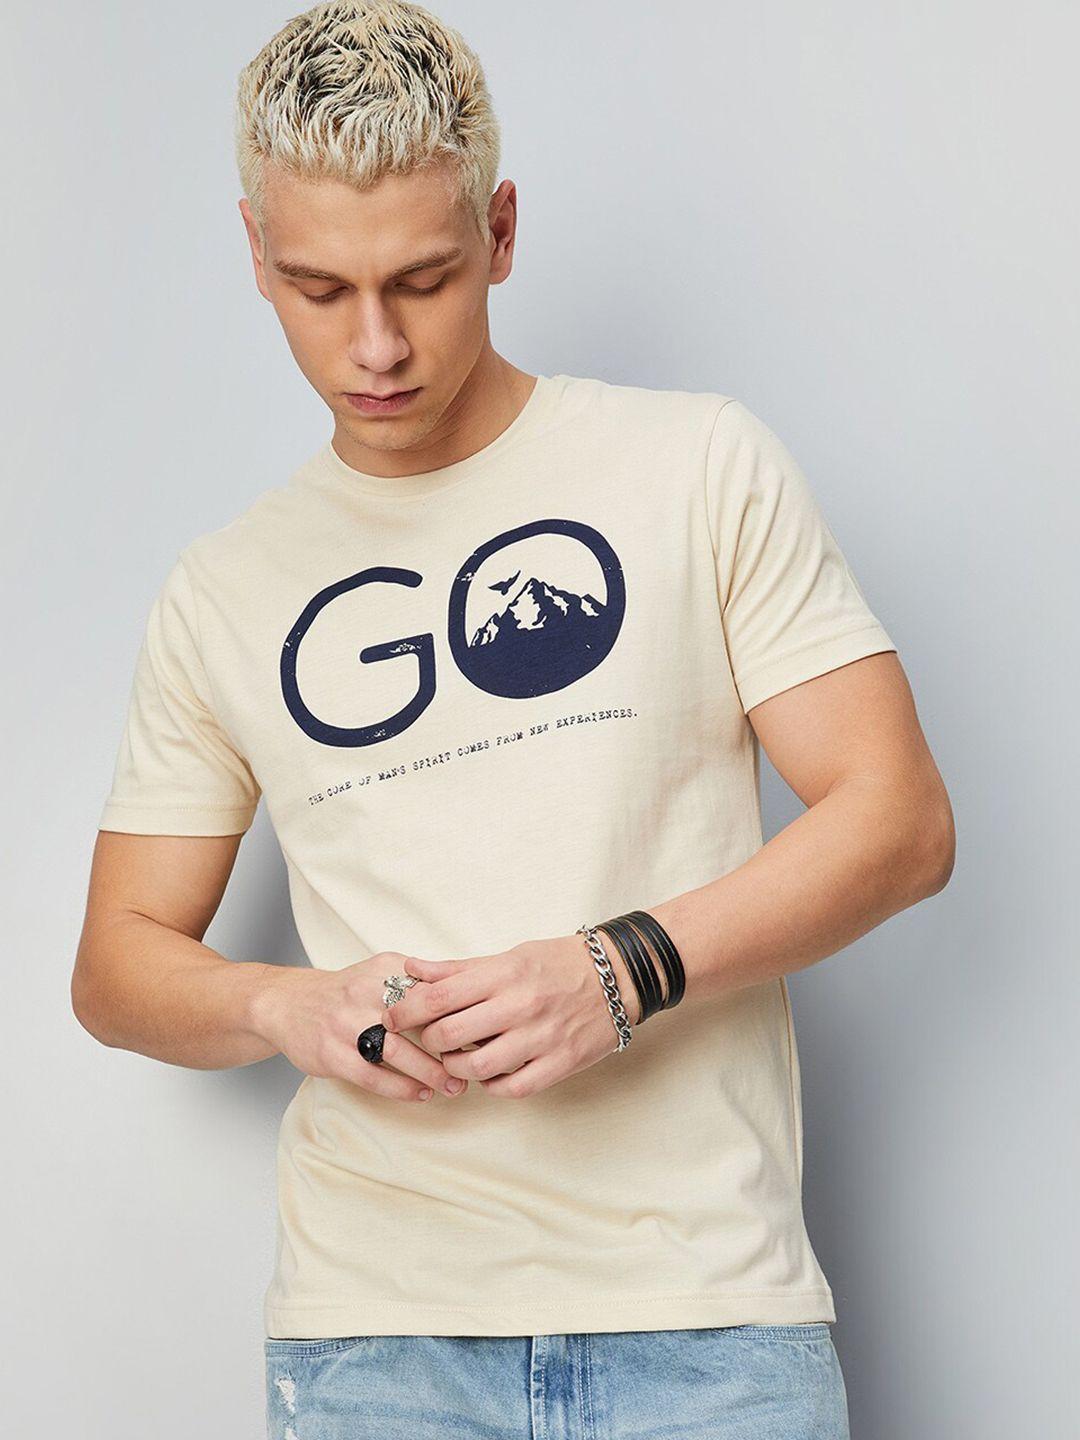 max Typography Printed Pure Cotton T-shirt